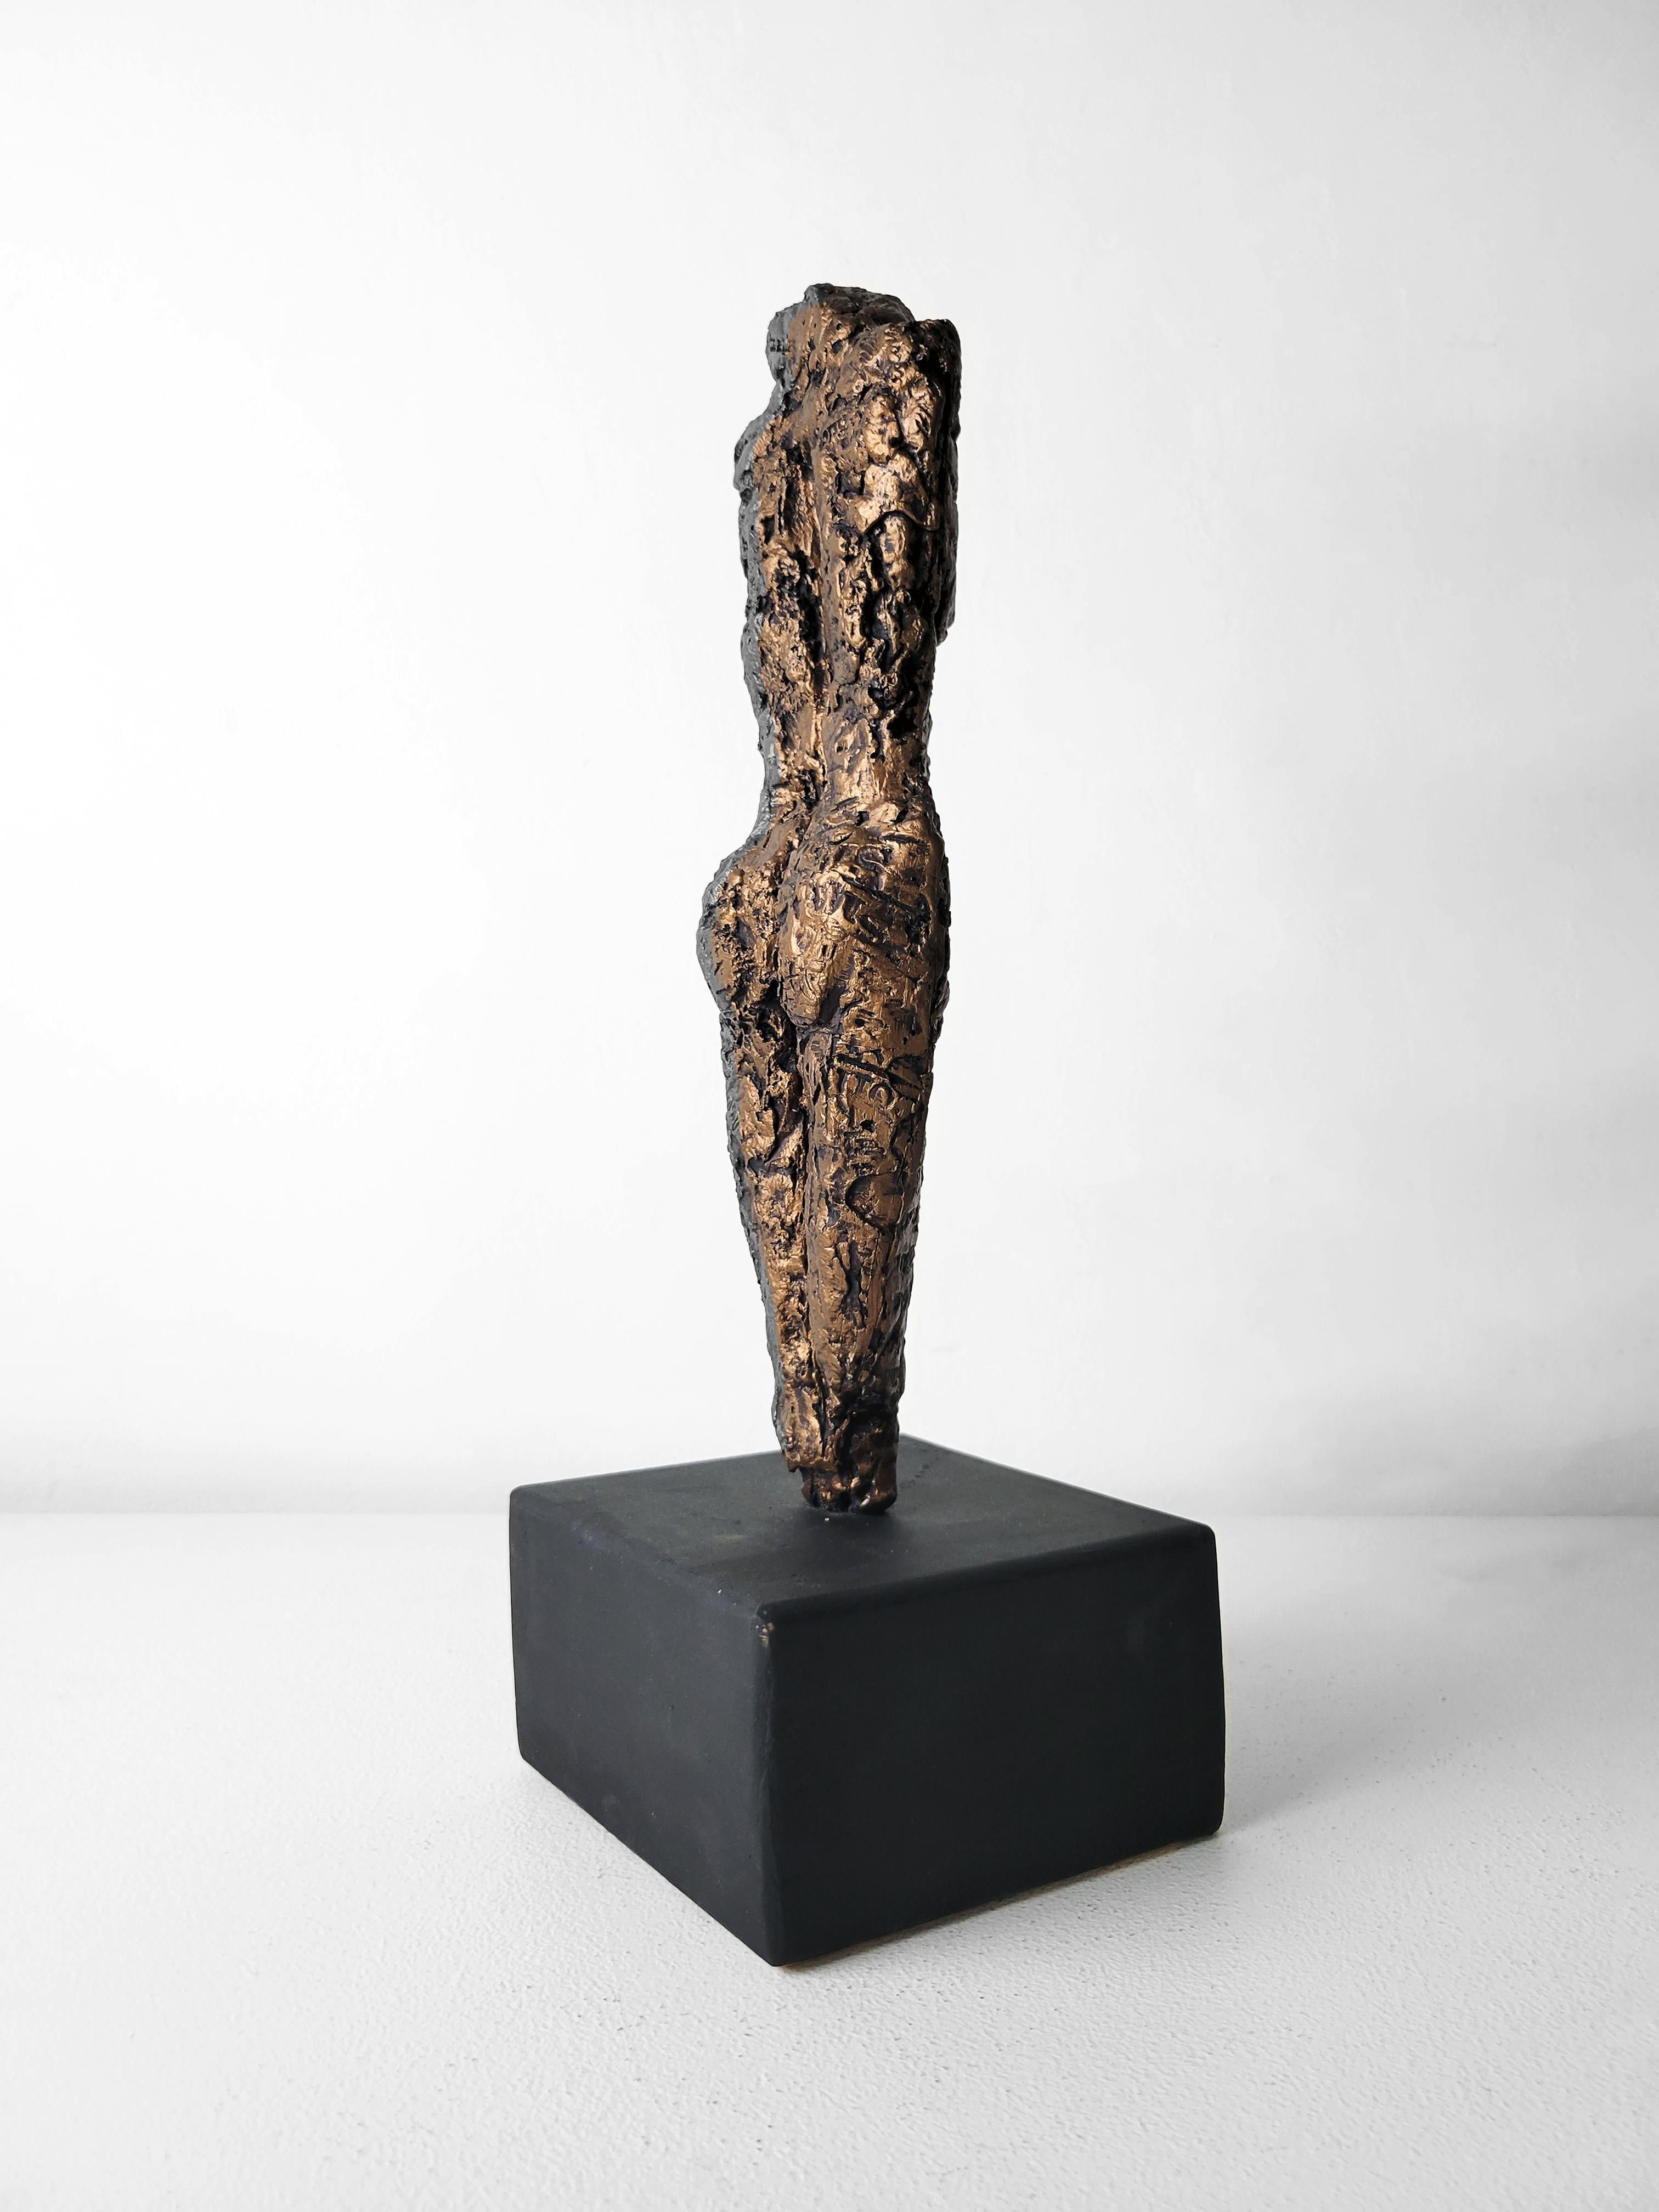 This sculpture from Linda Stein’s Knights of Protection series functions both as a defender in battle and a symbol of pacifism. The sculpture is constructed from metallic resin, wood and mixed media.

Stein's works are in more than 25 museum